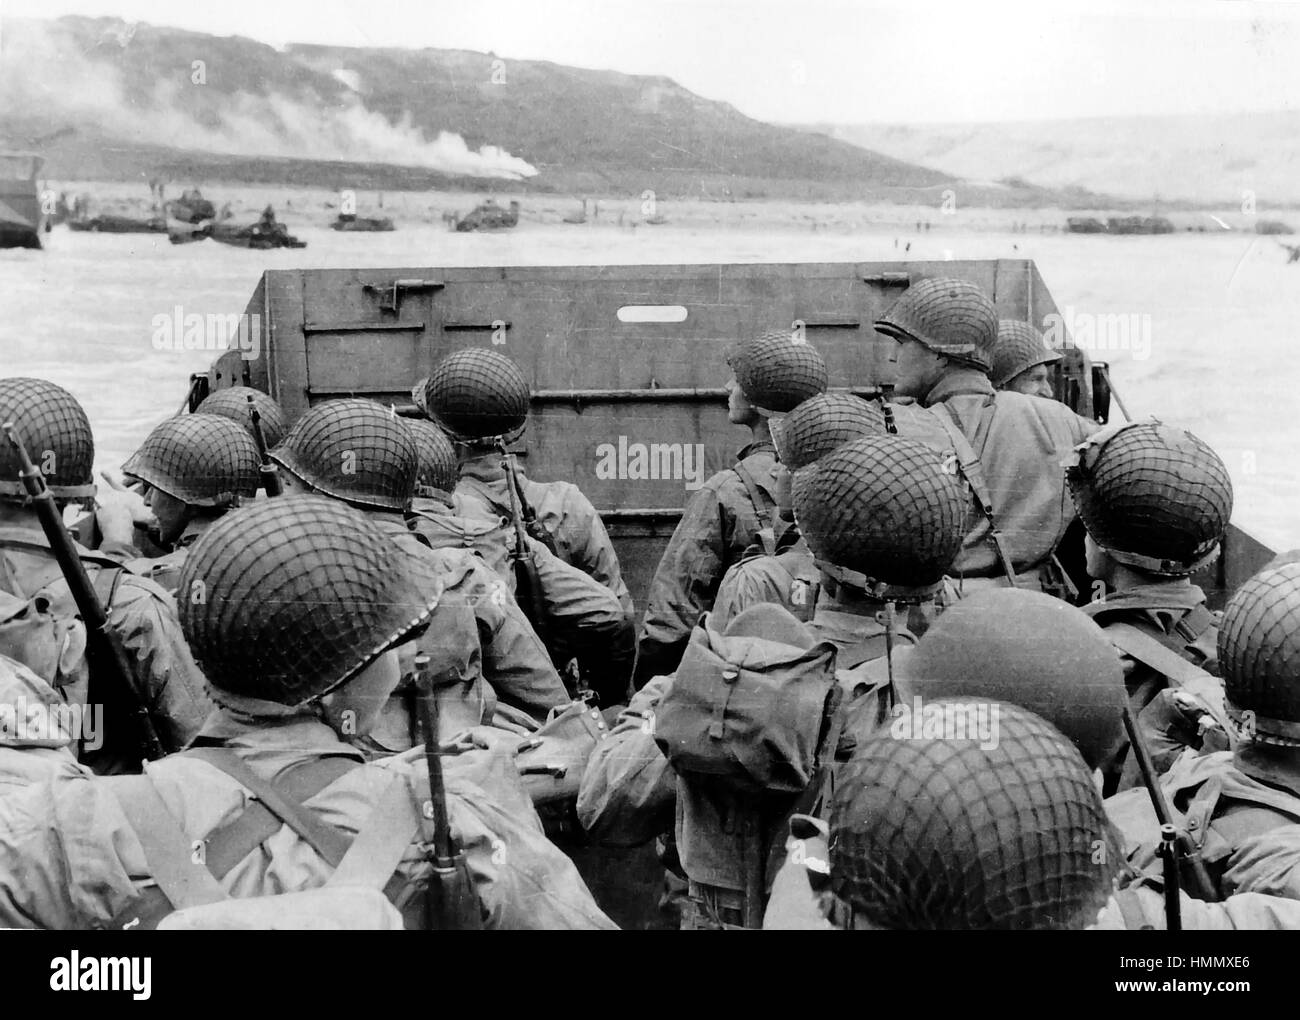 D-DAY 6 JUNE 1944   US landing craft approaches one of the beaches. Photo: US Army Stock Photo